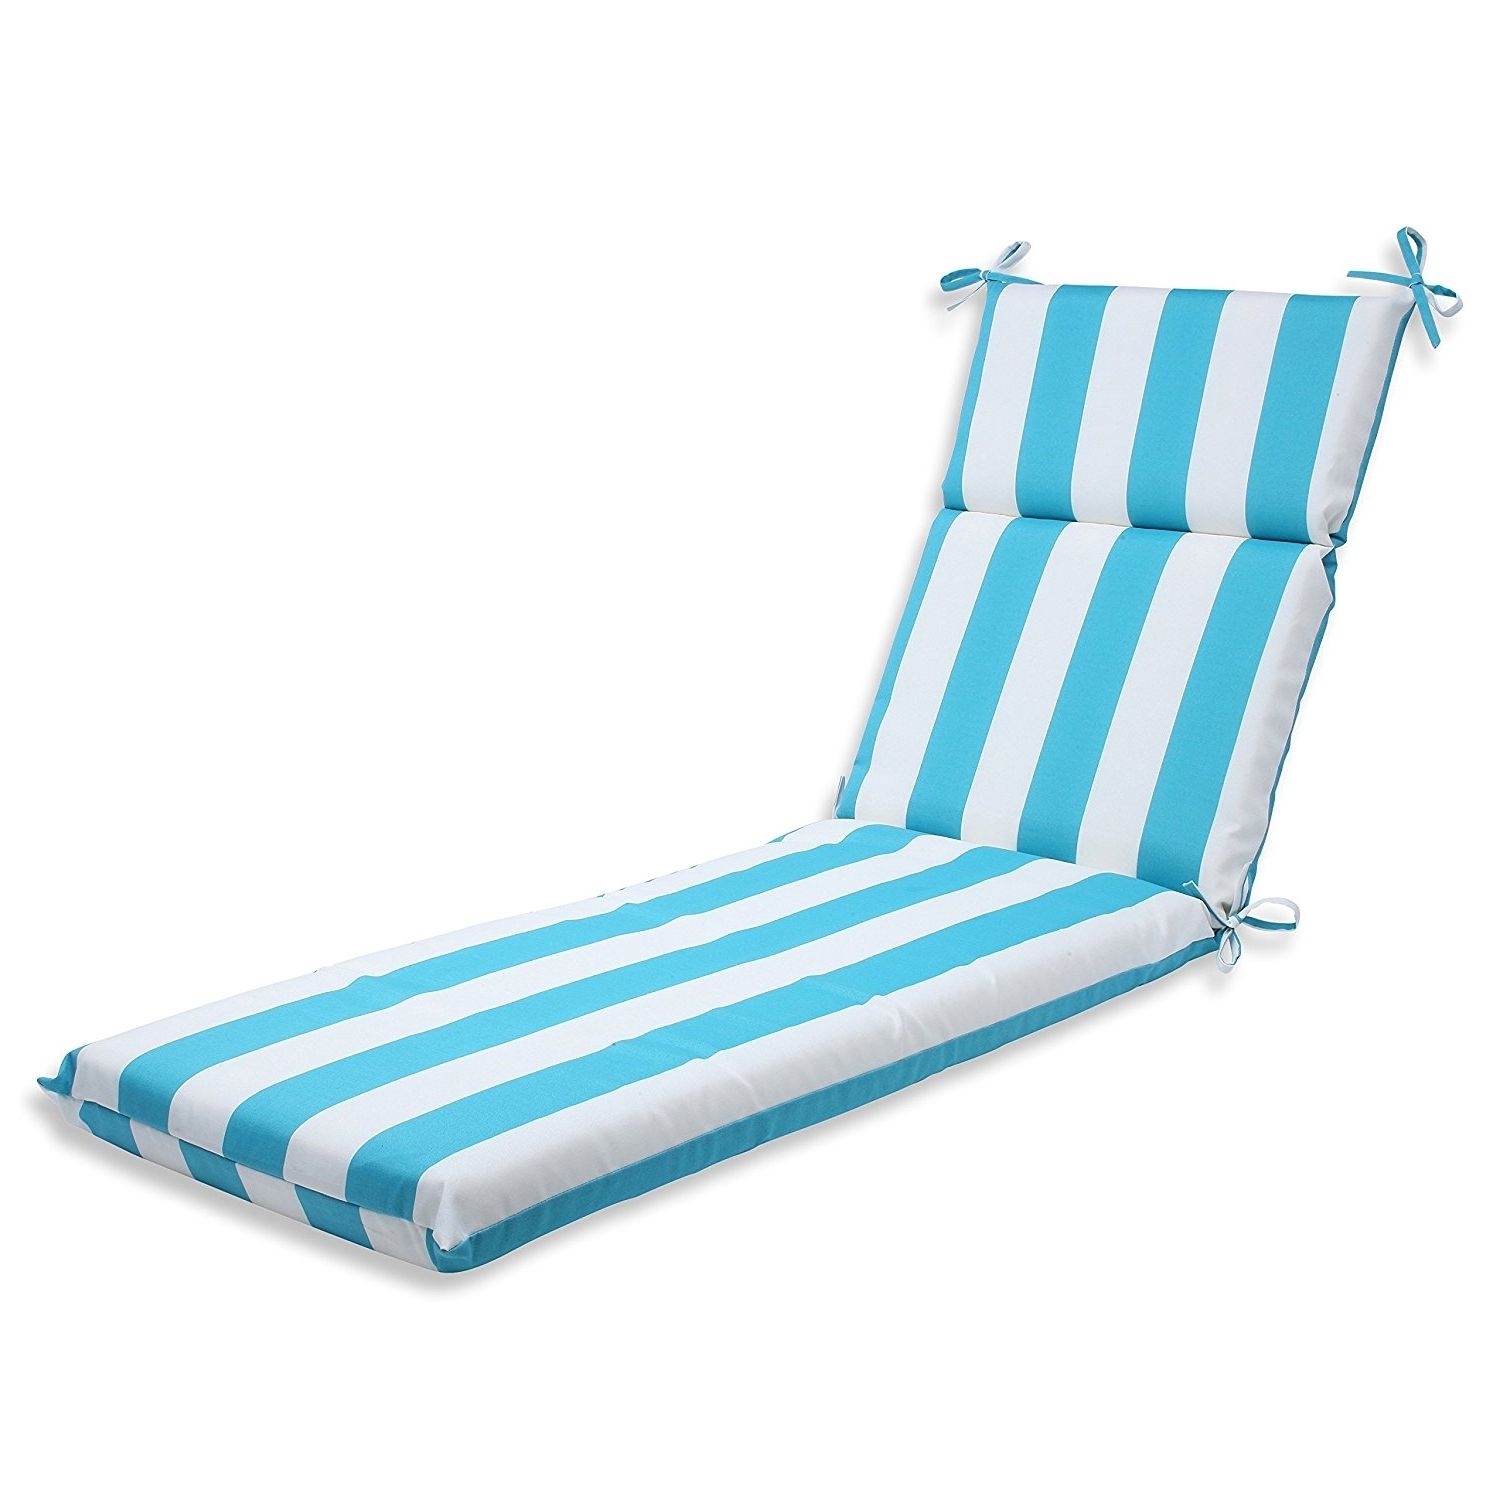 Amazon: Pillow Perfect Outdoor Cabana Stripe Chaise Lounge Regarding Best And Newest Outdoor Chaise Lounge Cushions (View 5 of 15)